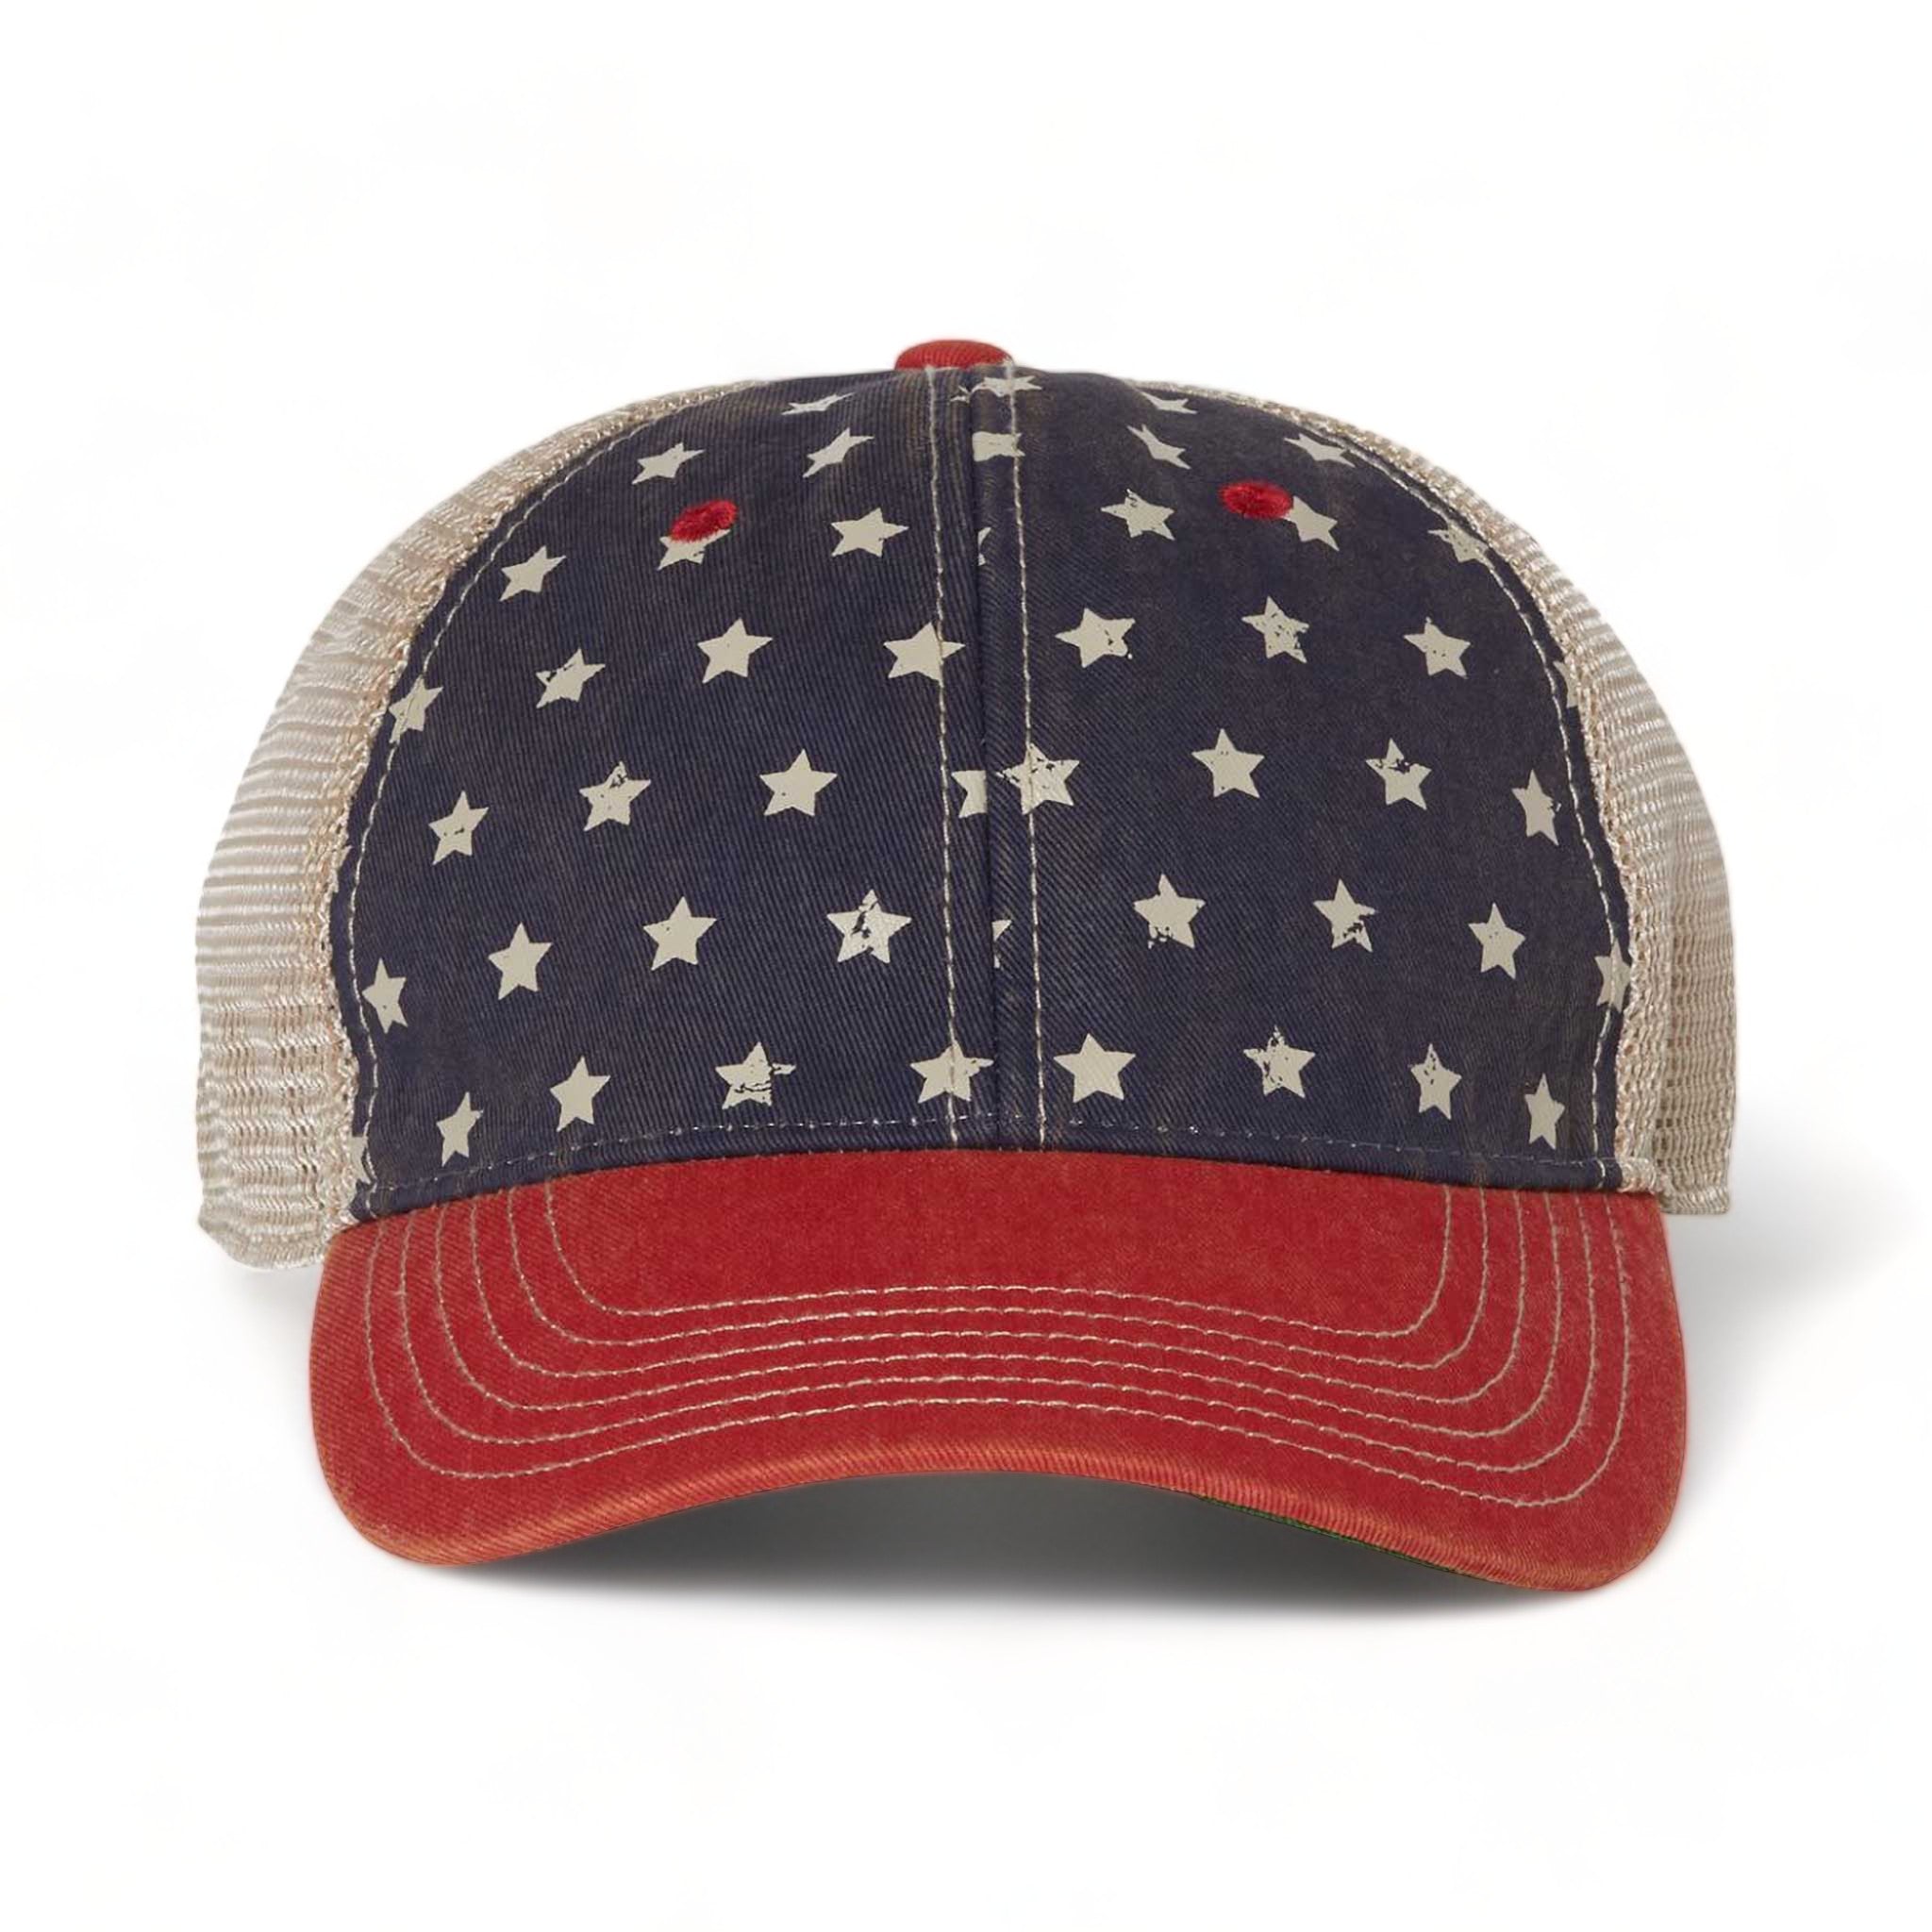 Front view of LEGACY OFA custom hat in merica and khaki